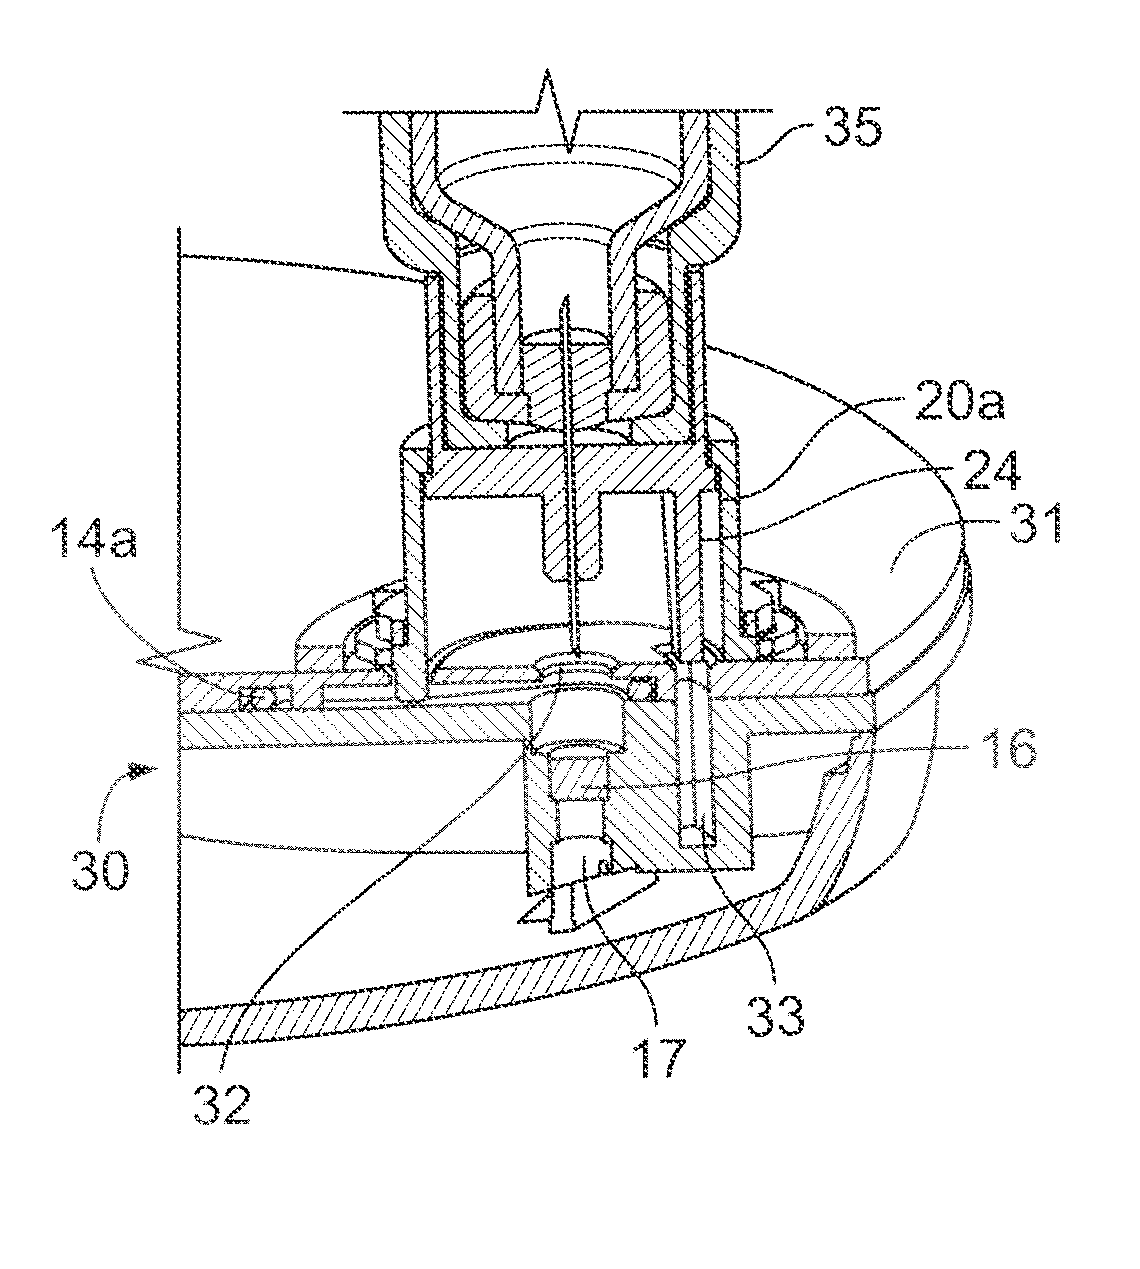 Medicine delivery device with restricted access filling port